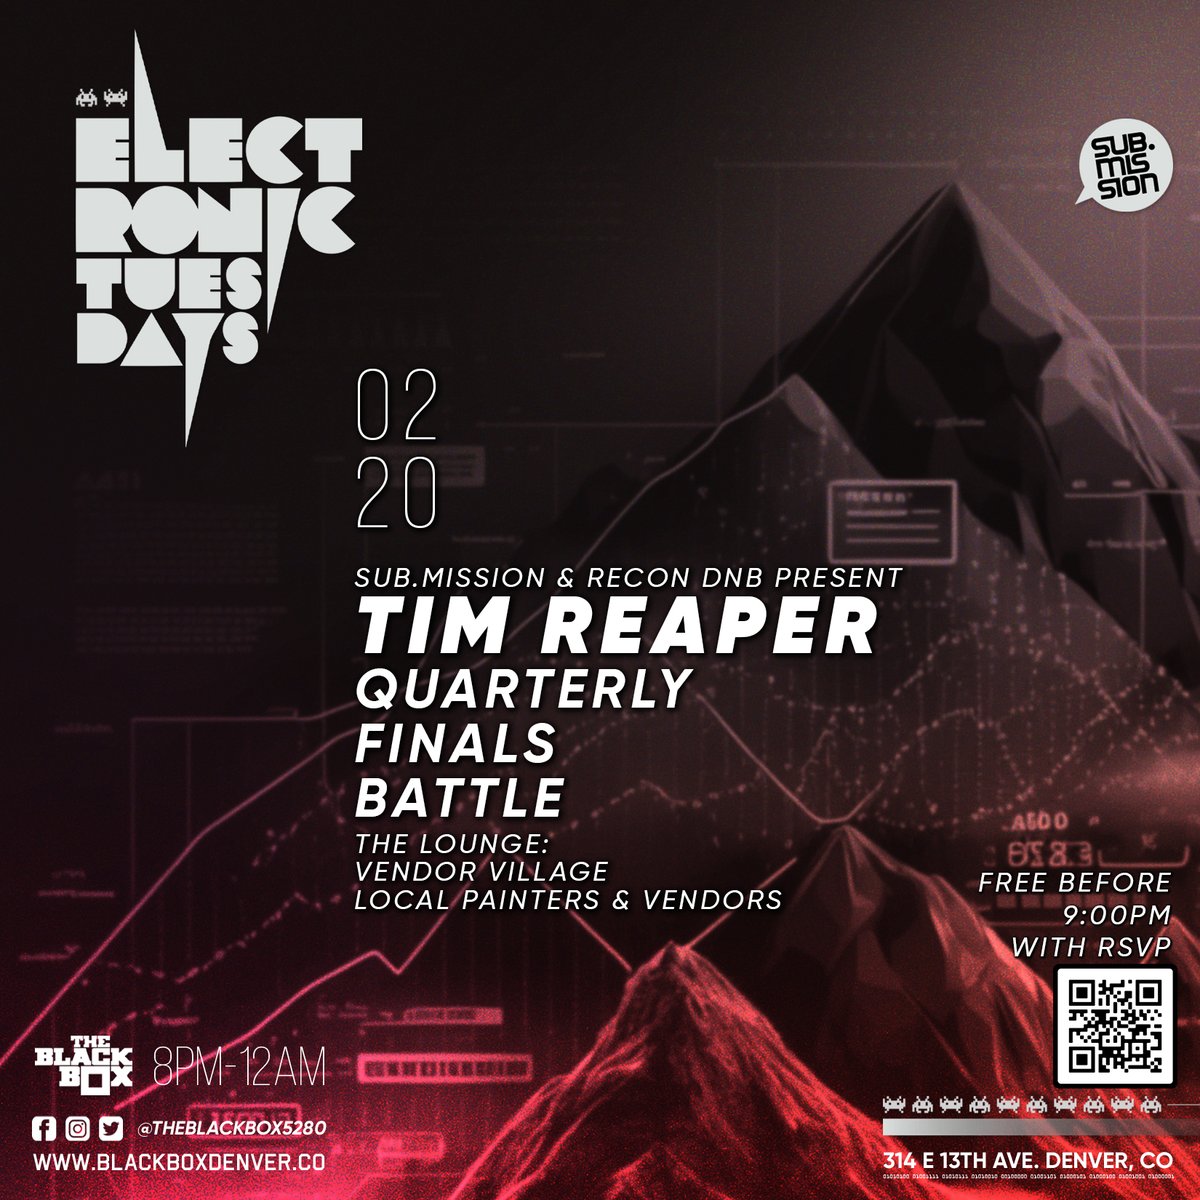 TONIGHT -- Electronic Tuesdays (18+) Sub.mission x @ReconDNB present: Tim Reaper Quarterly Finals Battle: @chefwamp vs. @omsine_ vs. 3zb33 Creative Village: Local Painters & Vendors (The Lounge) -- Tix & Free before 9pm RSVP: bit.ly/SubmissionFeb20